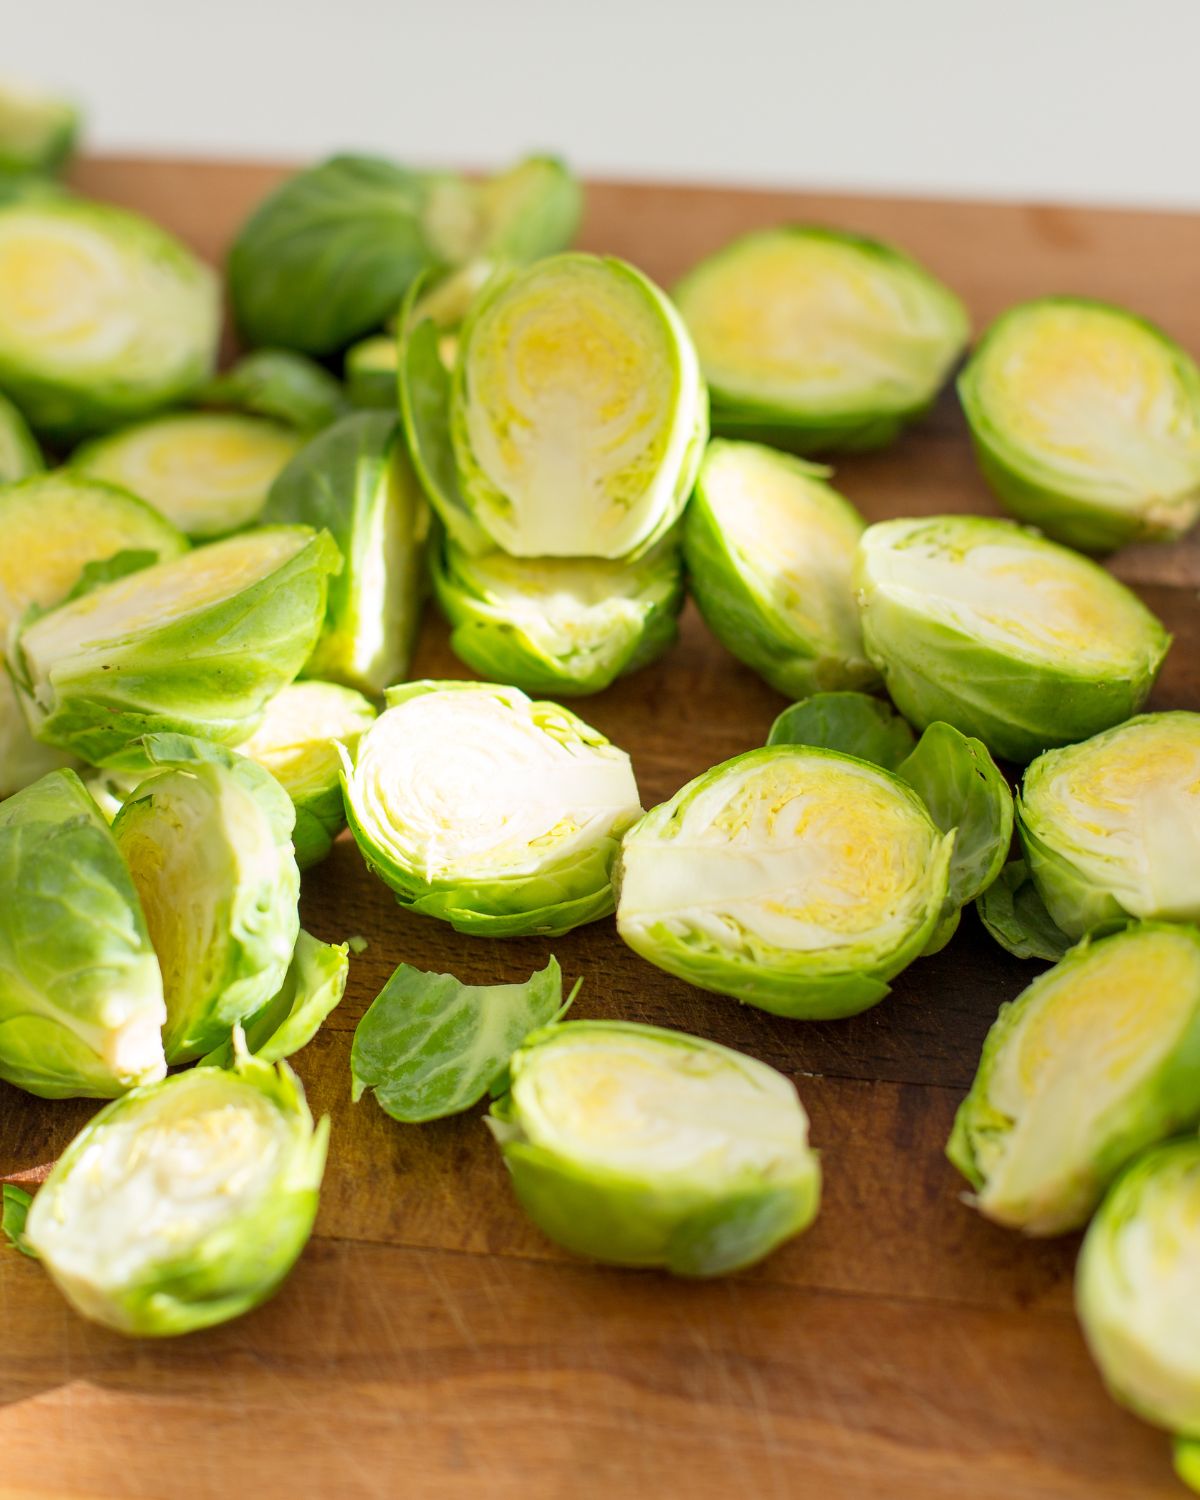 The slices of the brussels sprouts.